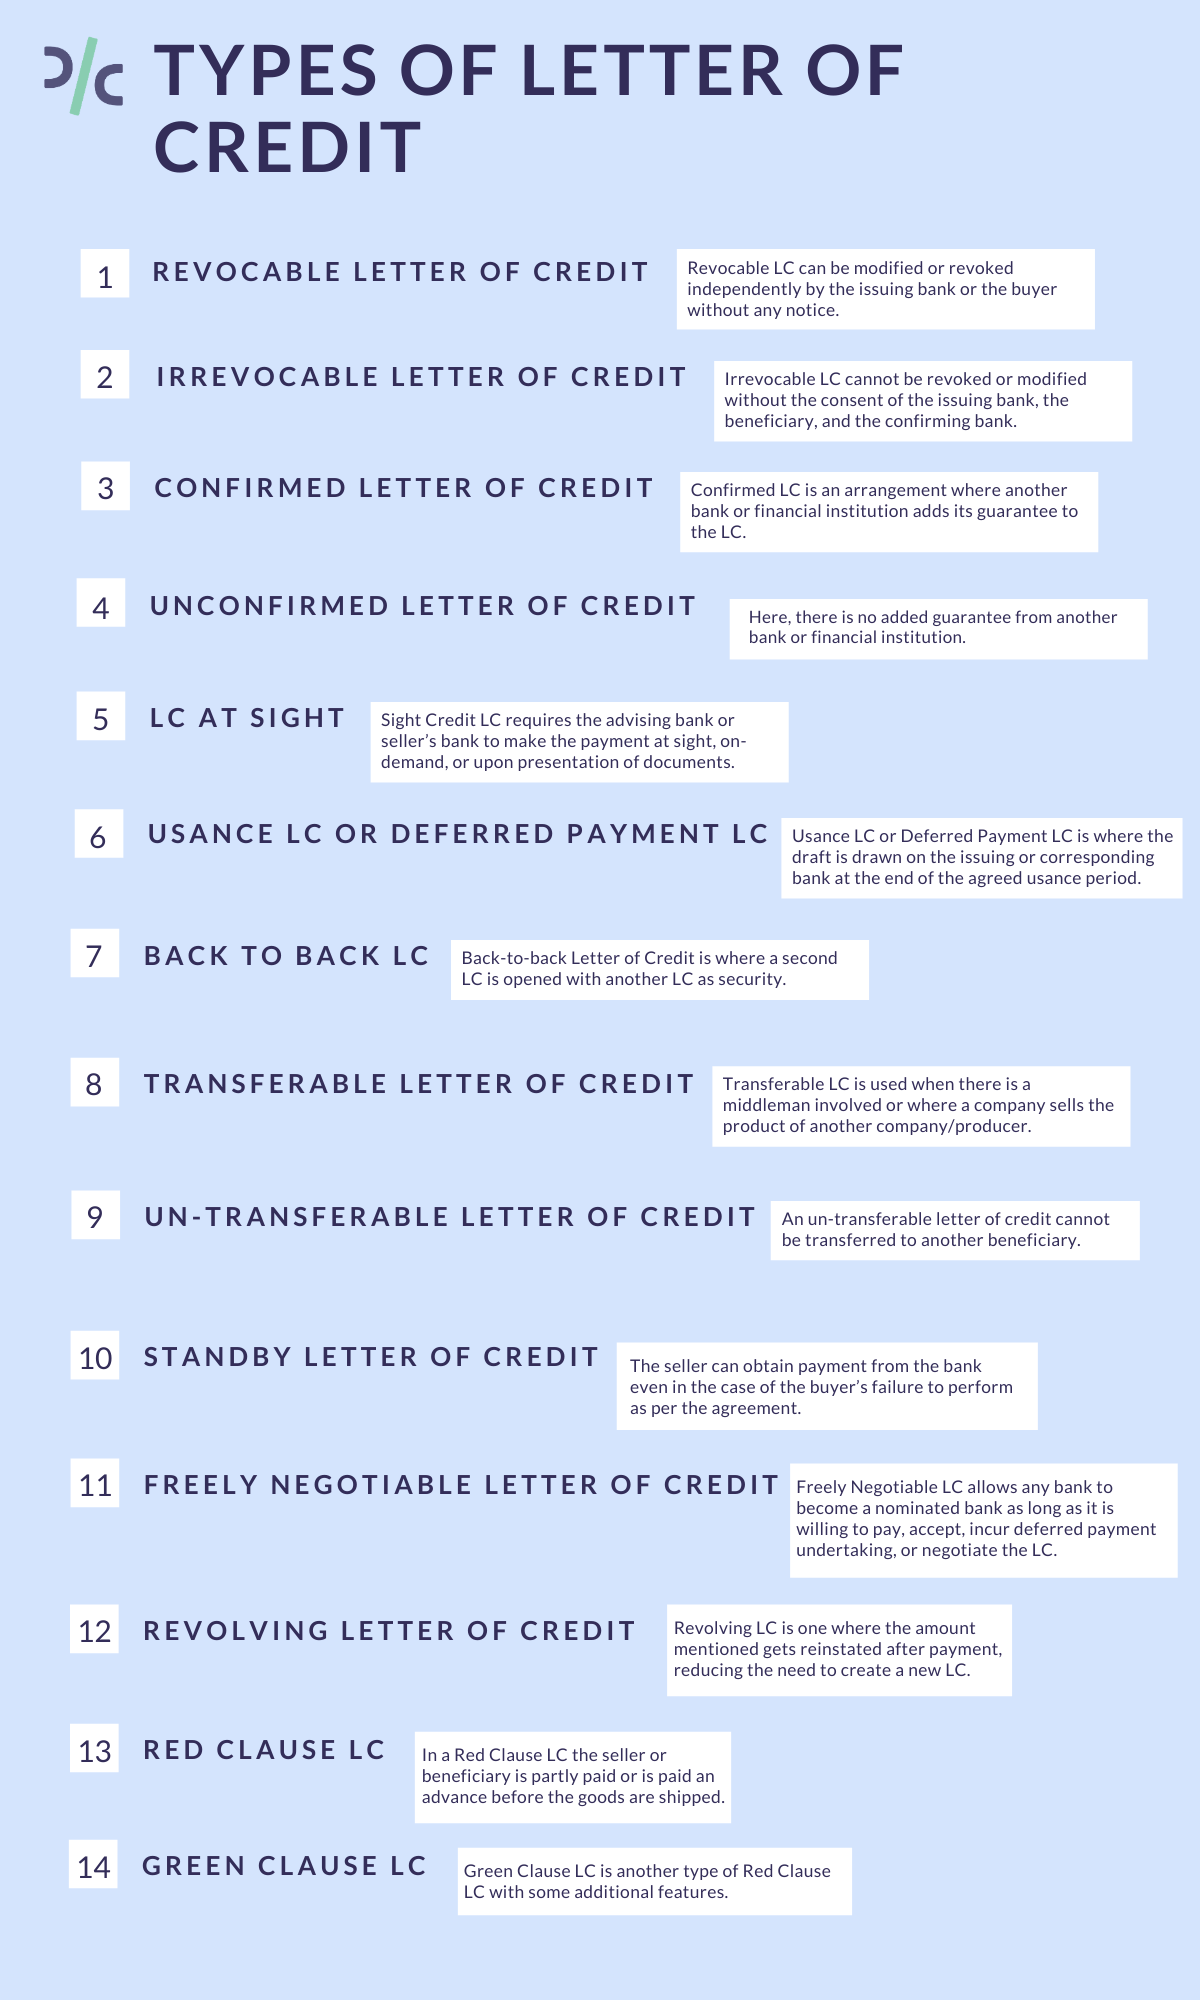 Types Of Letter Of Credit In Exports - Clauses, Payment Terms & More